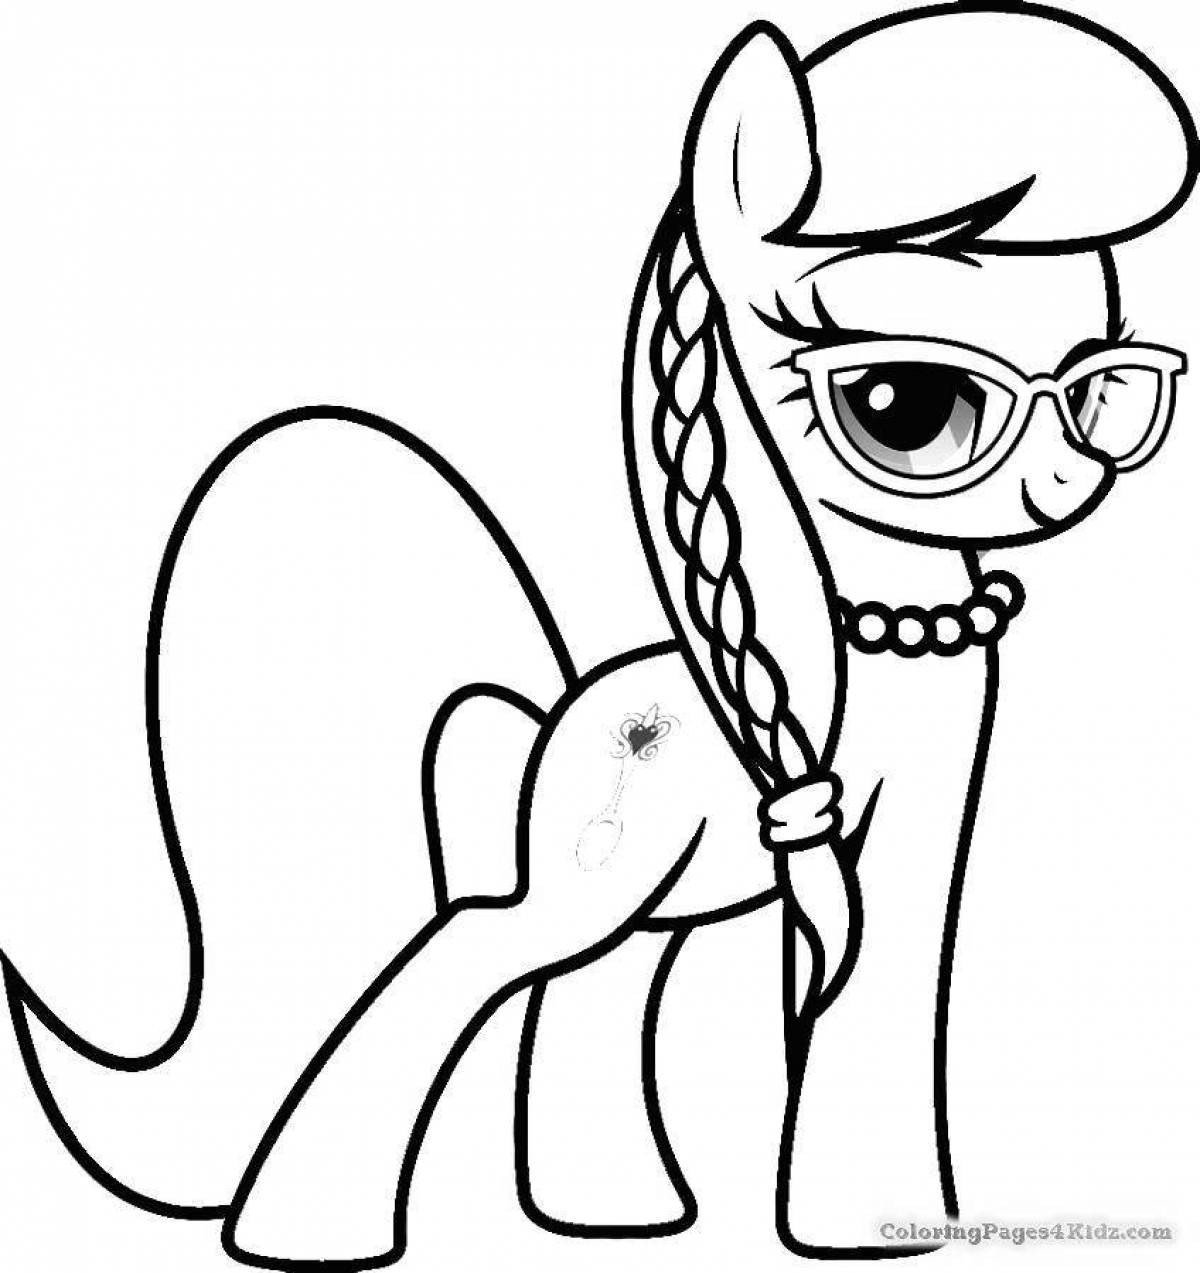 Playful pony life coloring page